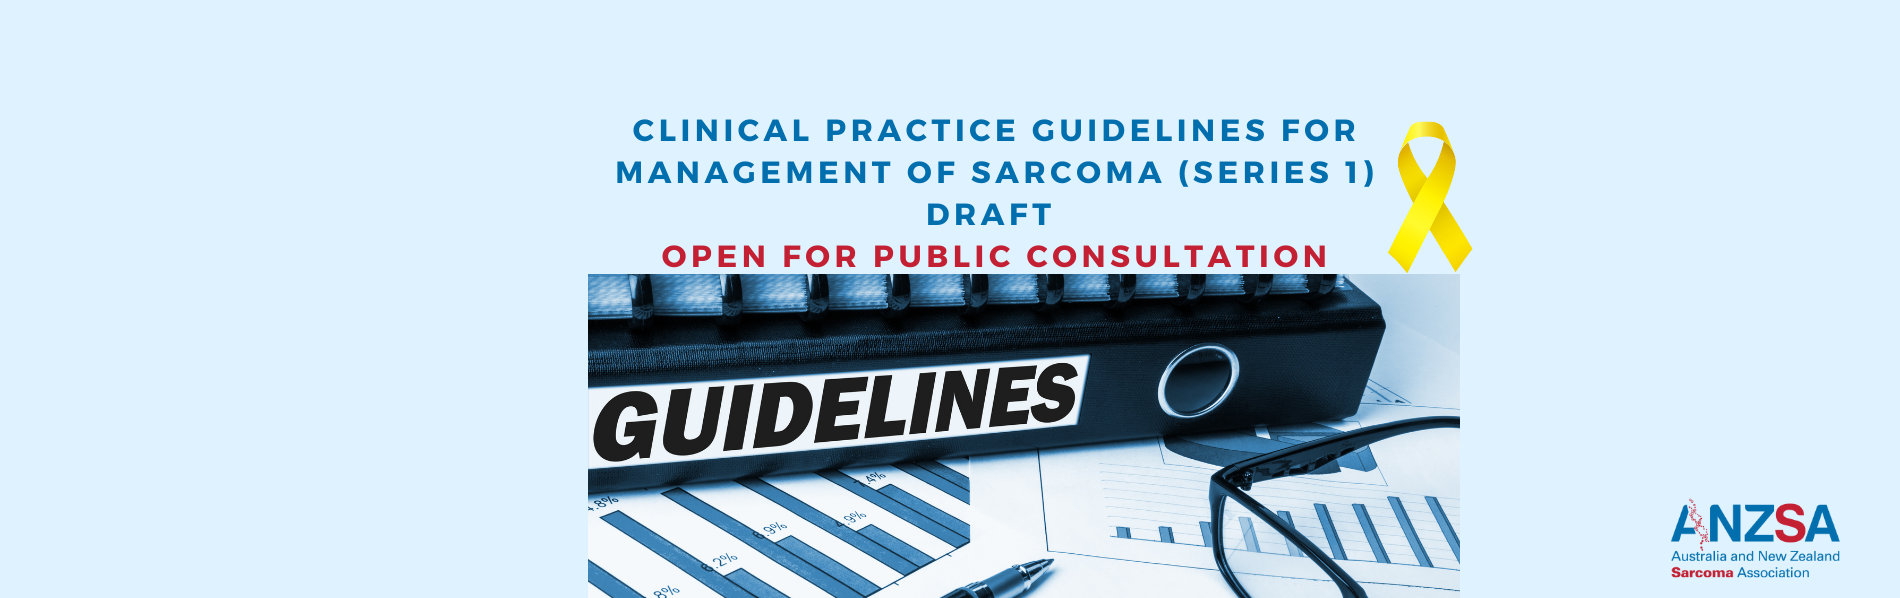 Clinical Practice Guidelines for Sarcoma Management (series 1)